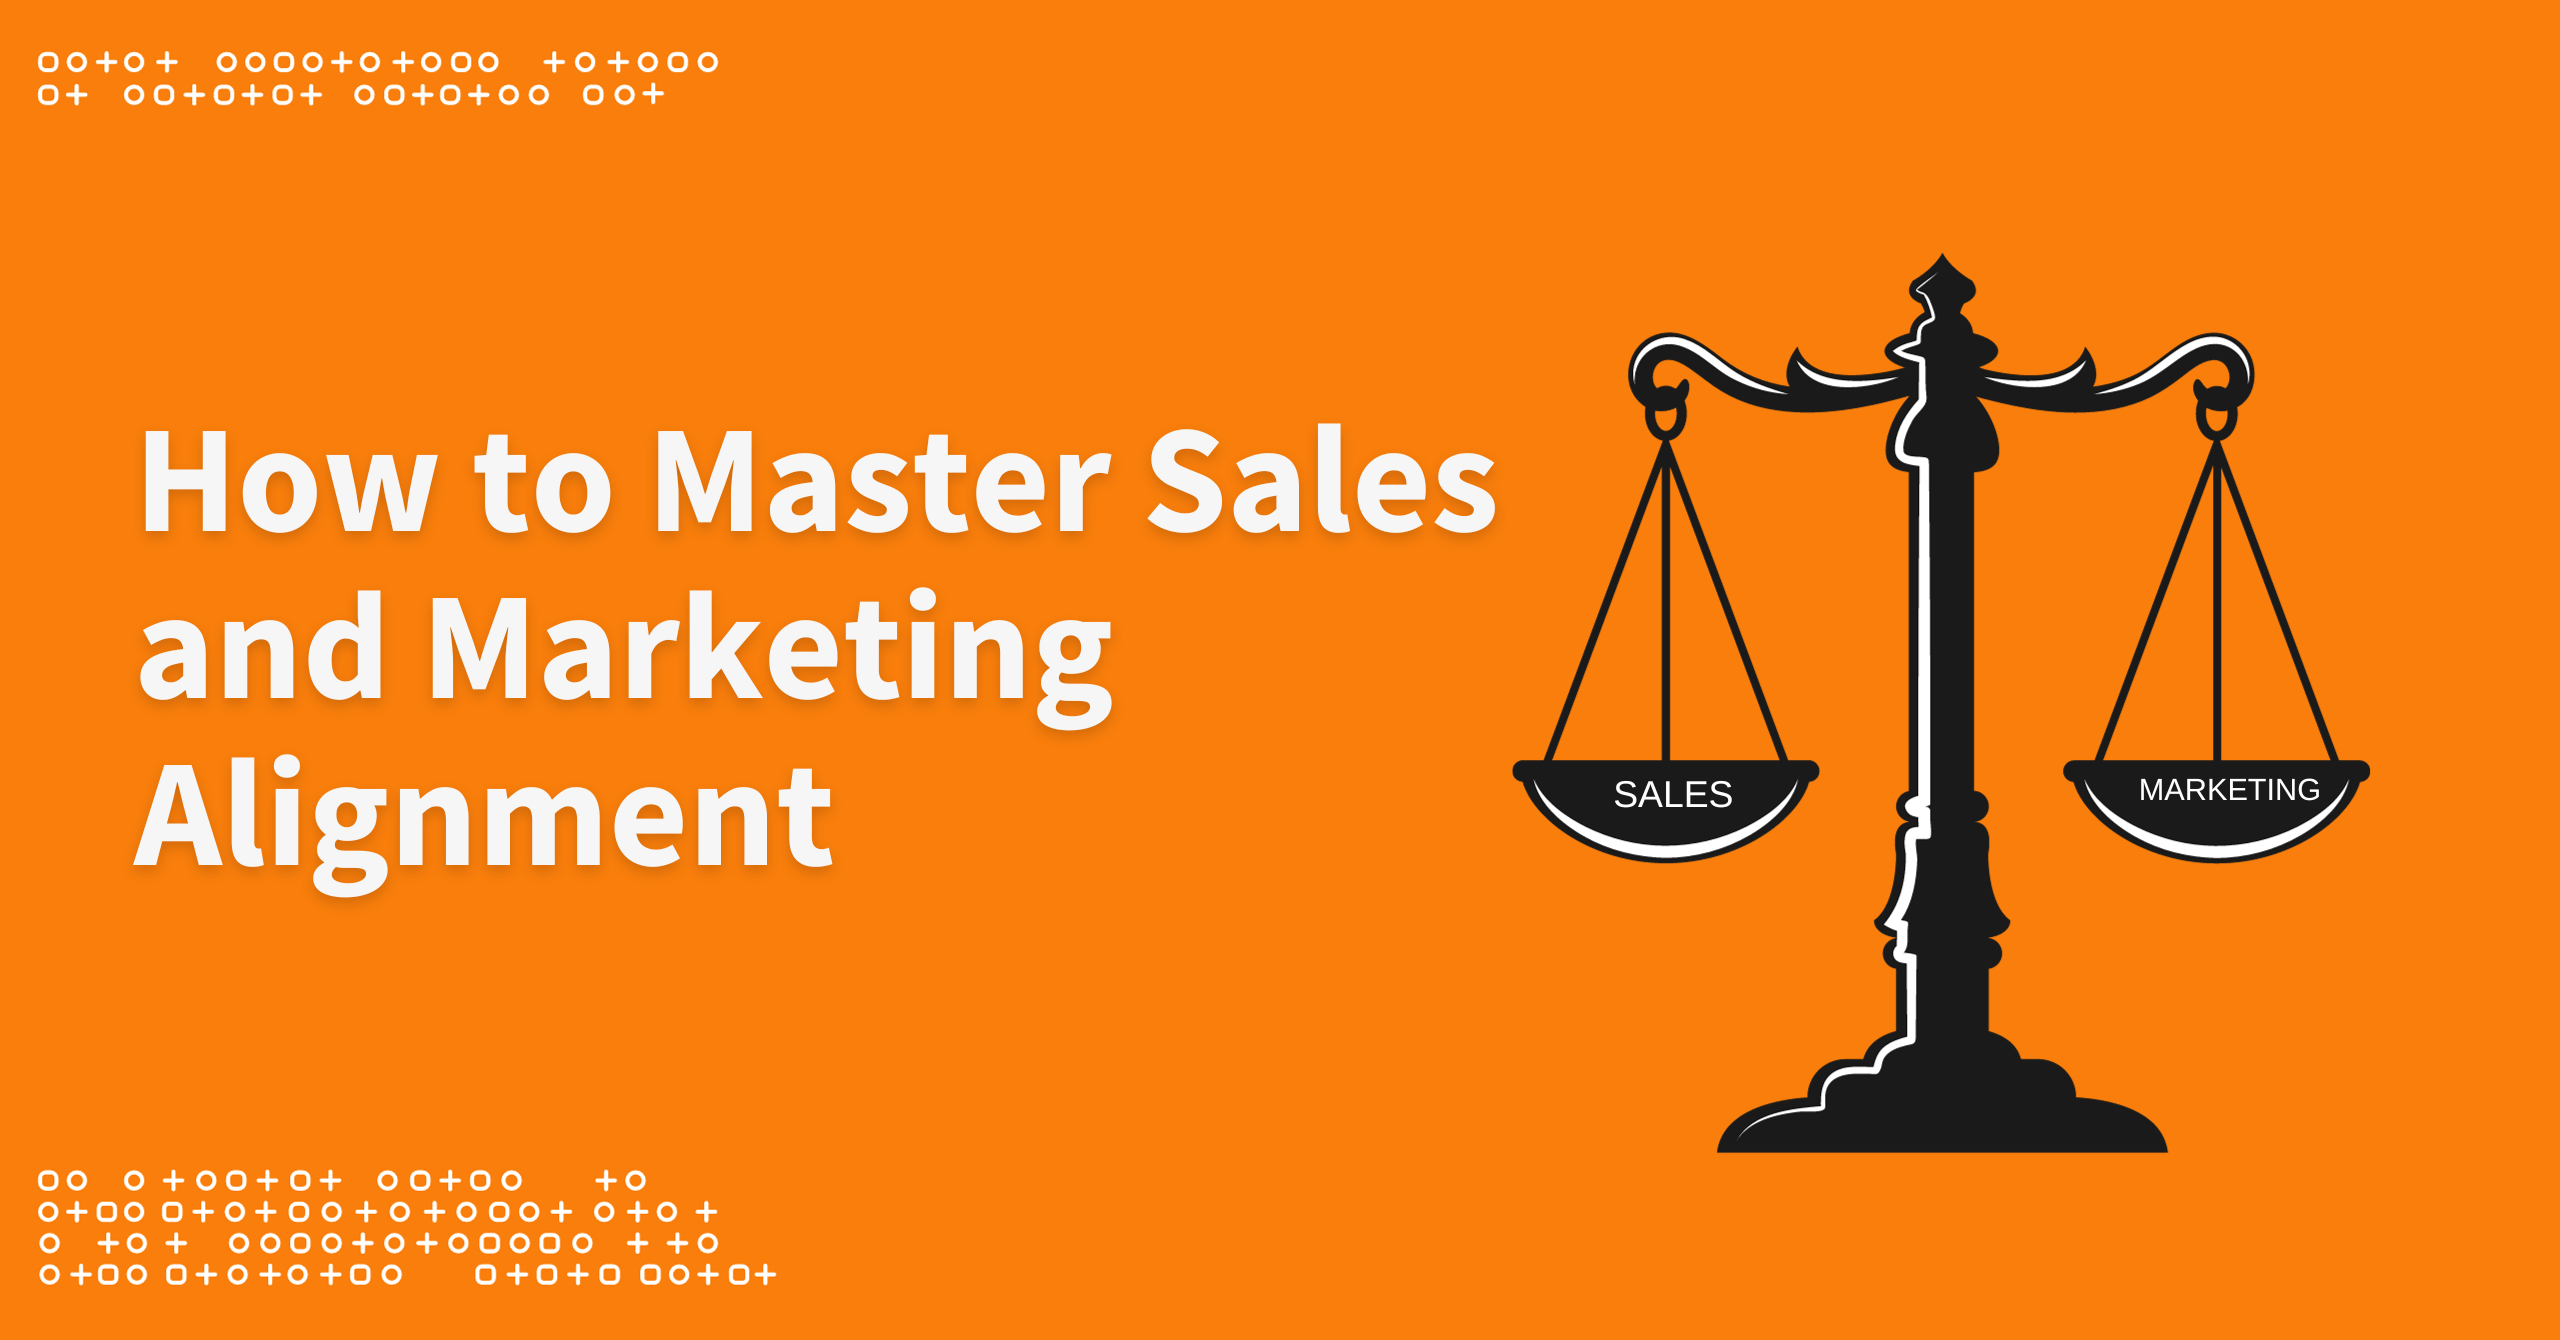 How to Master Sales and Marketing Alignment